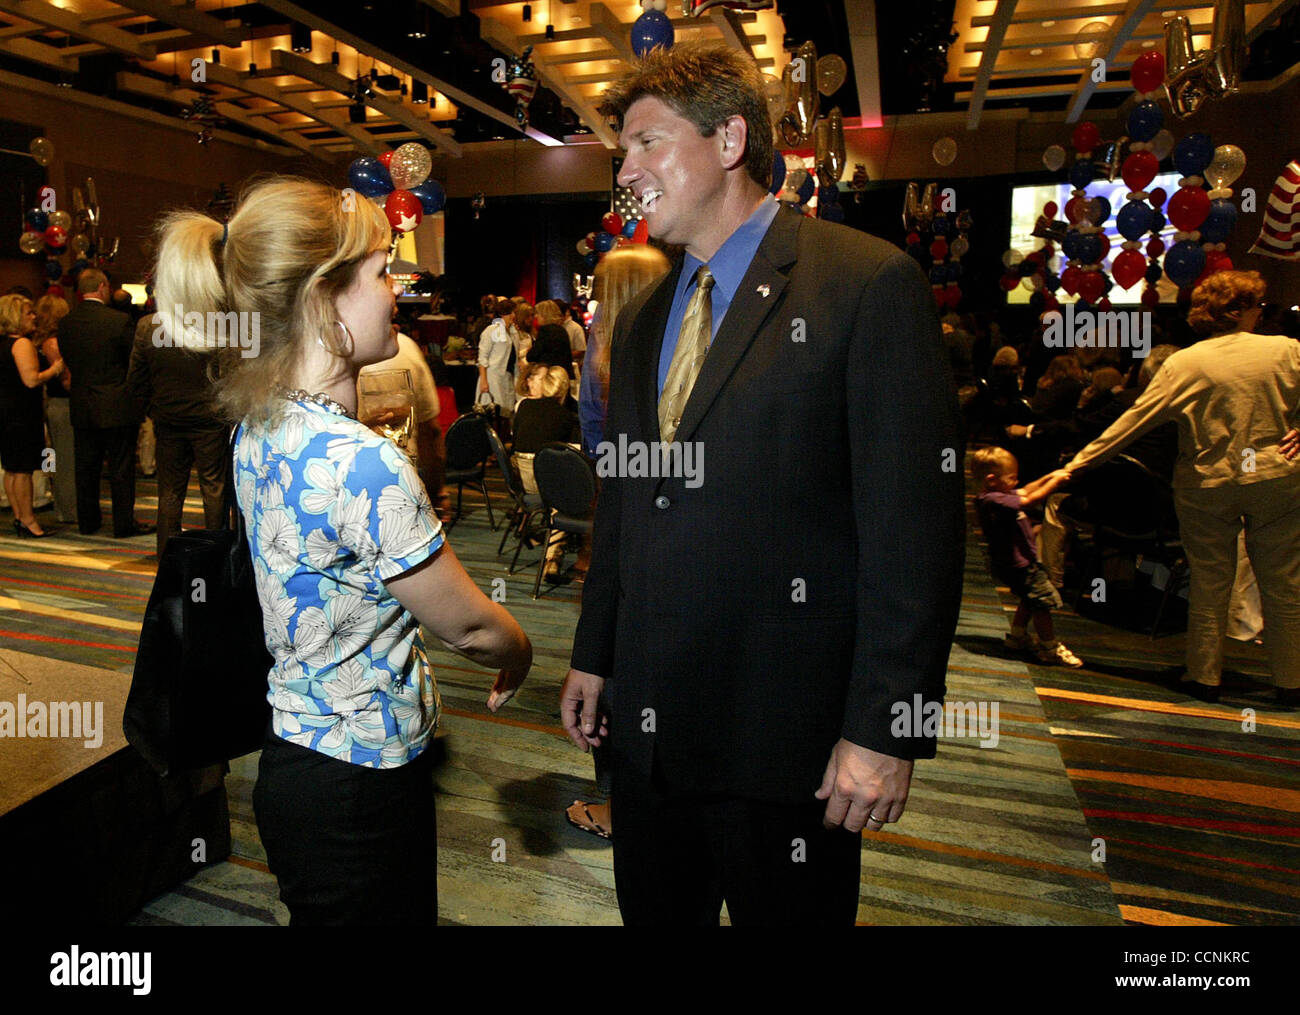 110204 met Edwards WEST PALM BEACH - Andy Edwards recieves support from Kelly Layman of Palm Beach during the Republican Victory Party at Palm Beach County Convention Center Tuesday night. Stock Photo